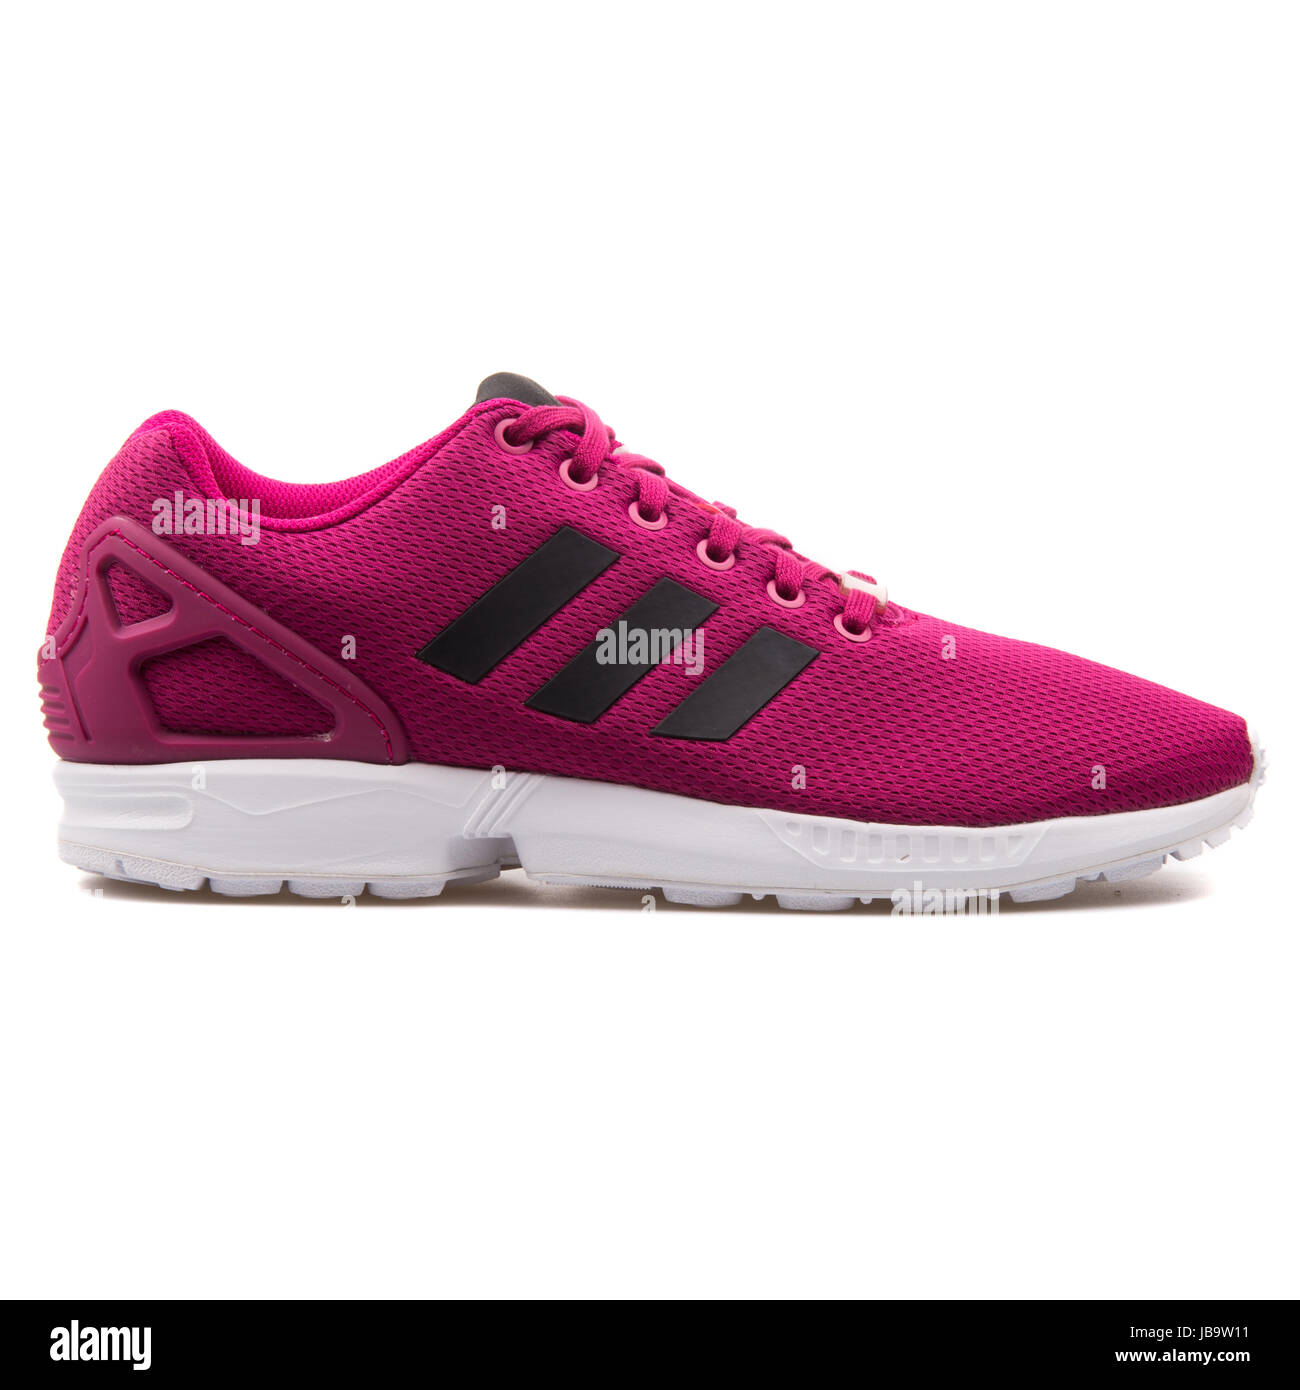 Adidas ZX Flux Pink Men's Running Shoes - AF6343 Stock Photo - Alamy